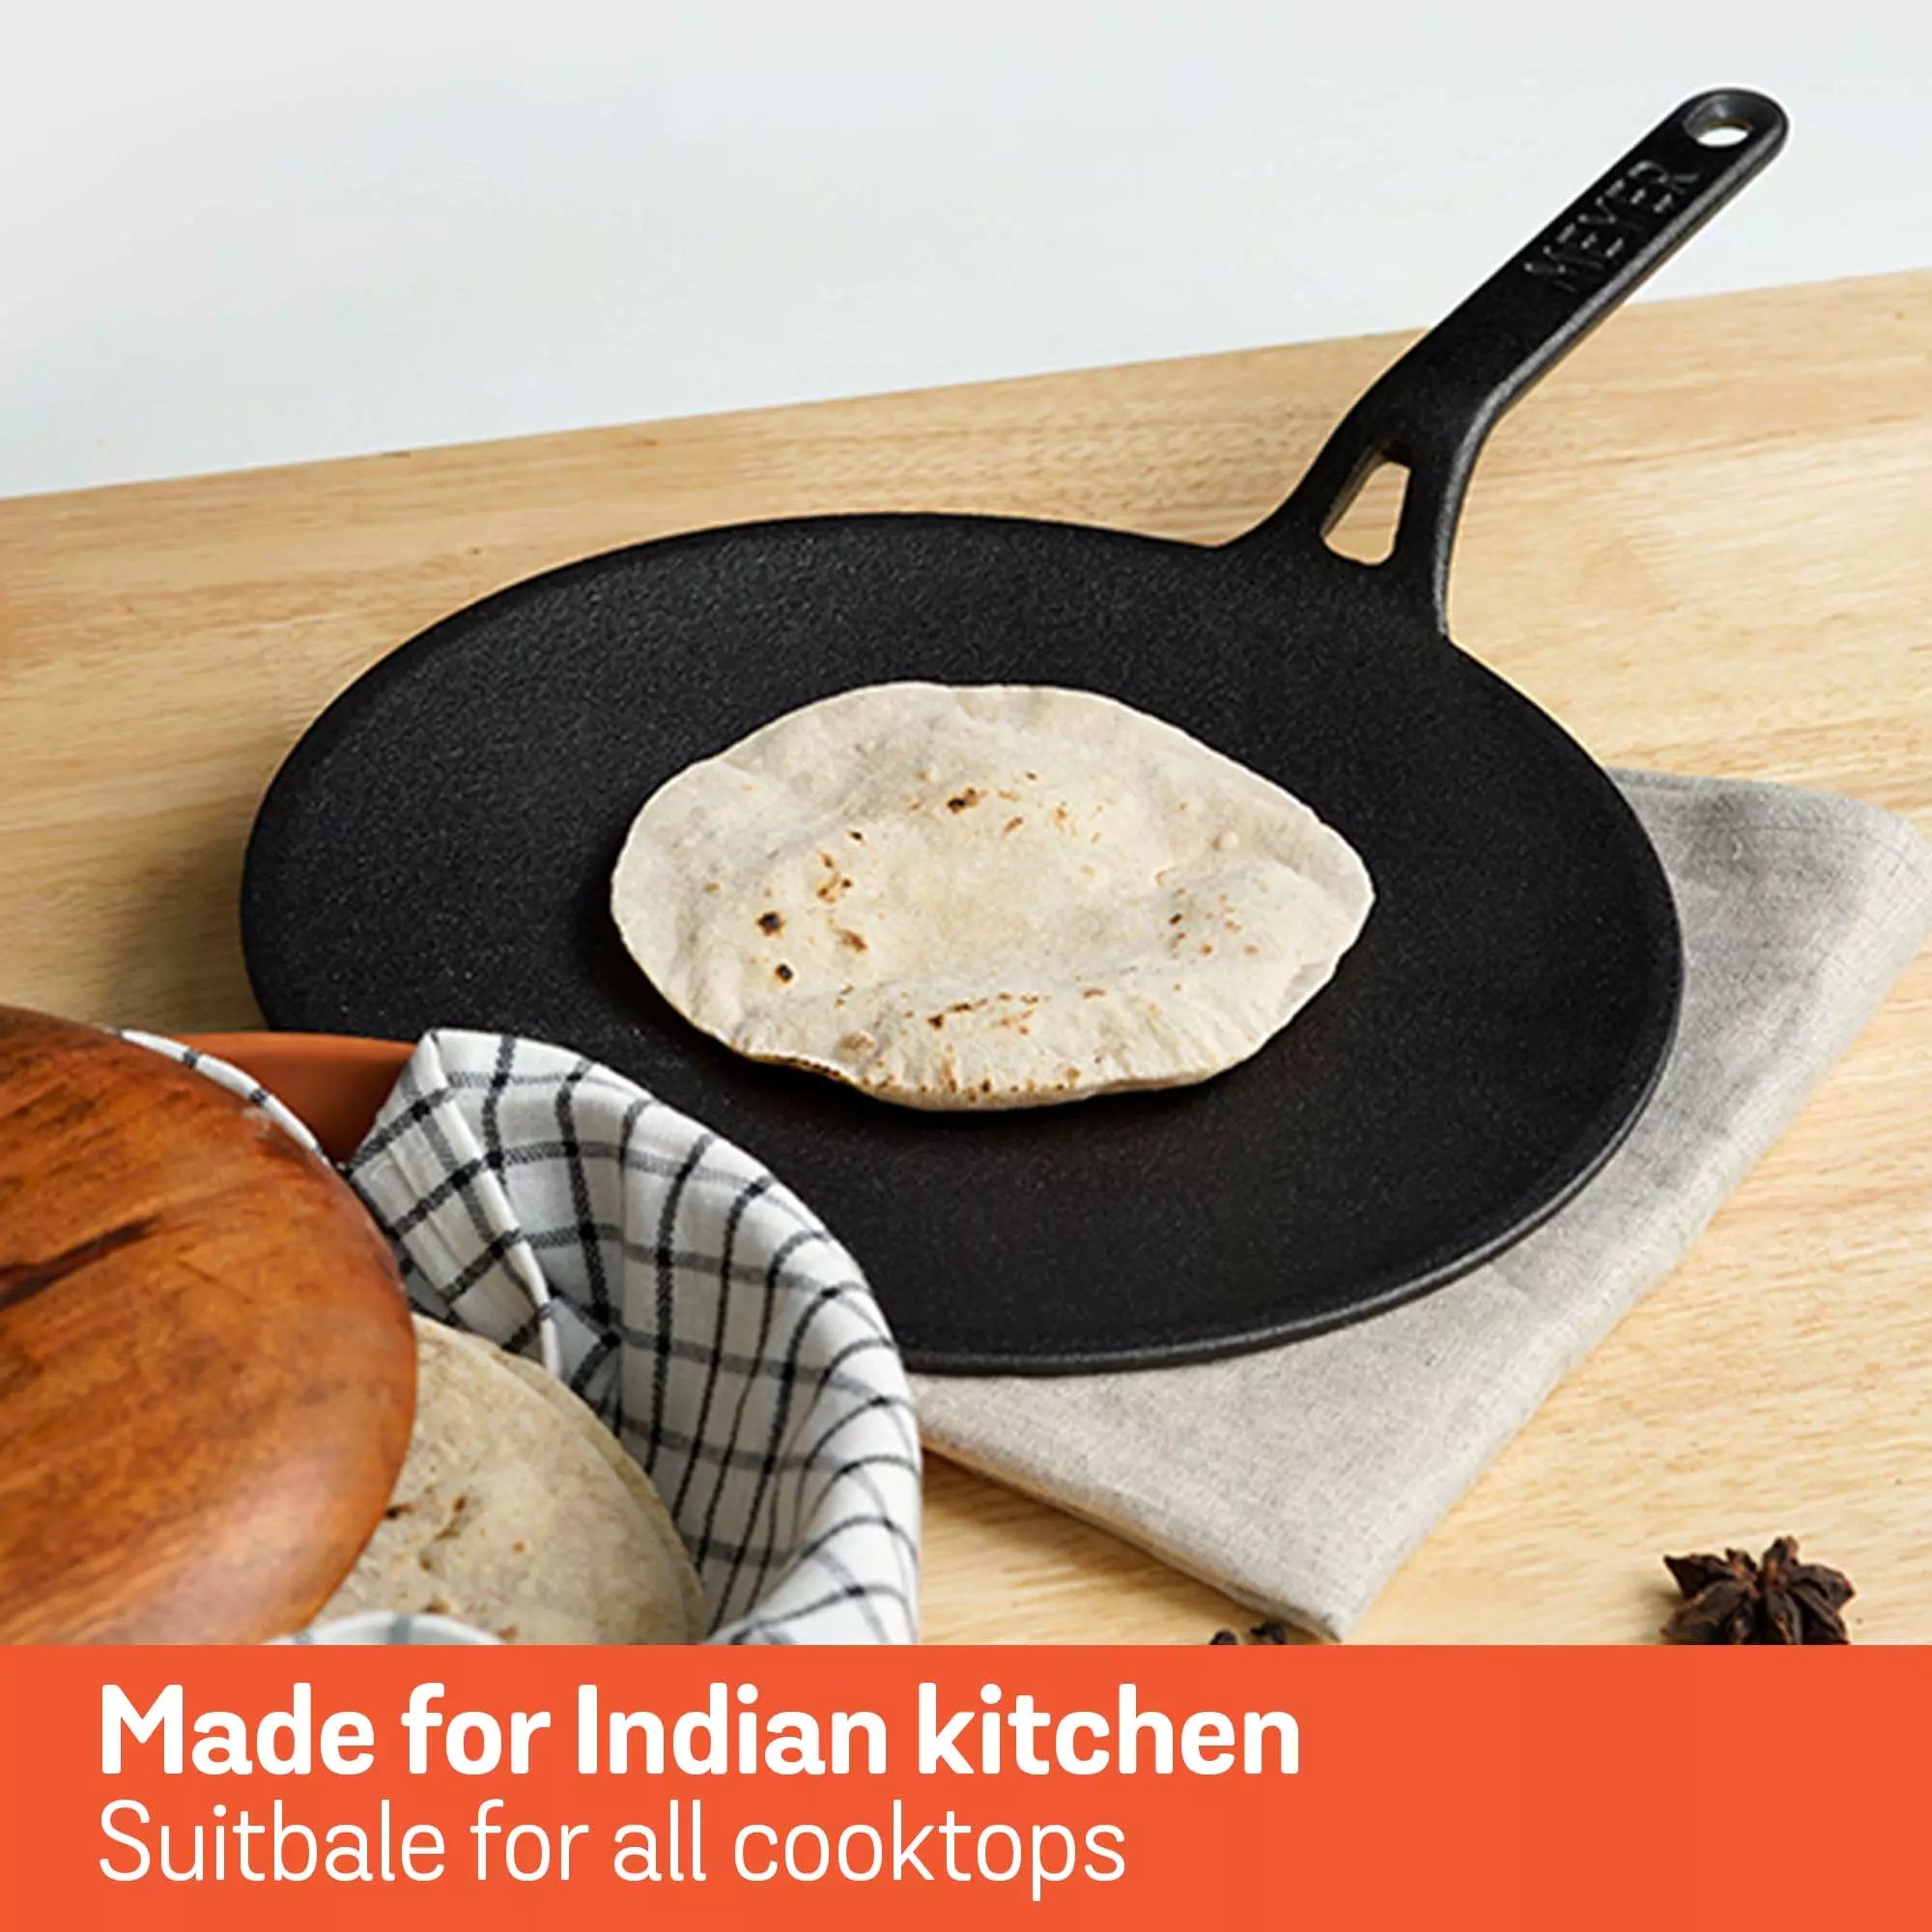 Best Cast Iron Tawa For Roti In India For Easy Cooking - PotsandPans India